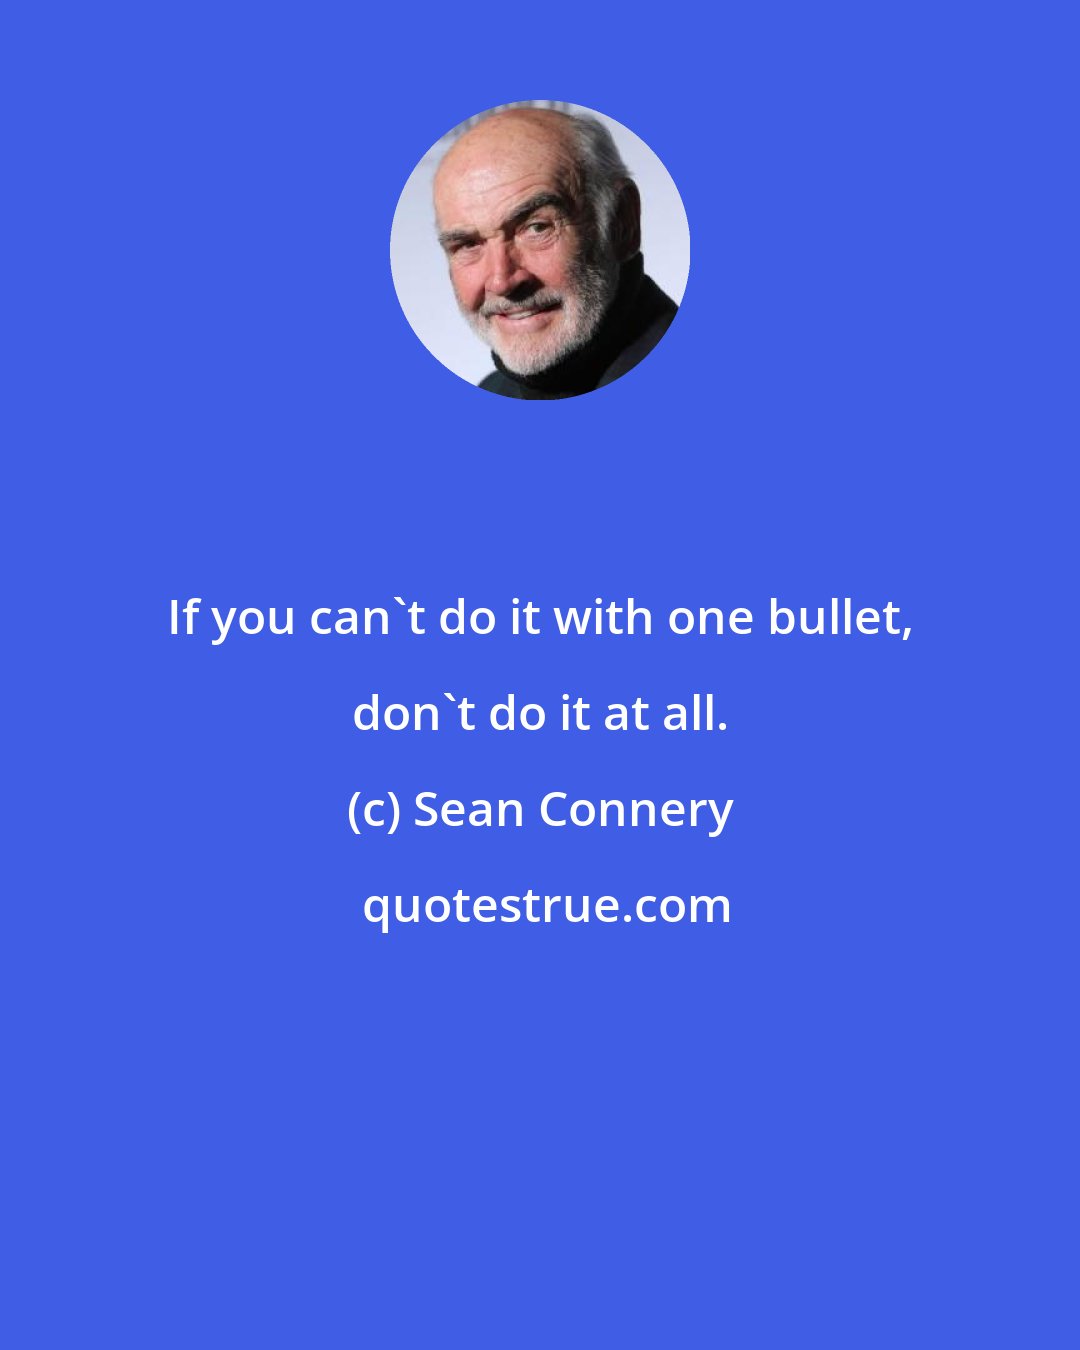 Sean Connery: If you can't do it with one bullet, don't do it at all.